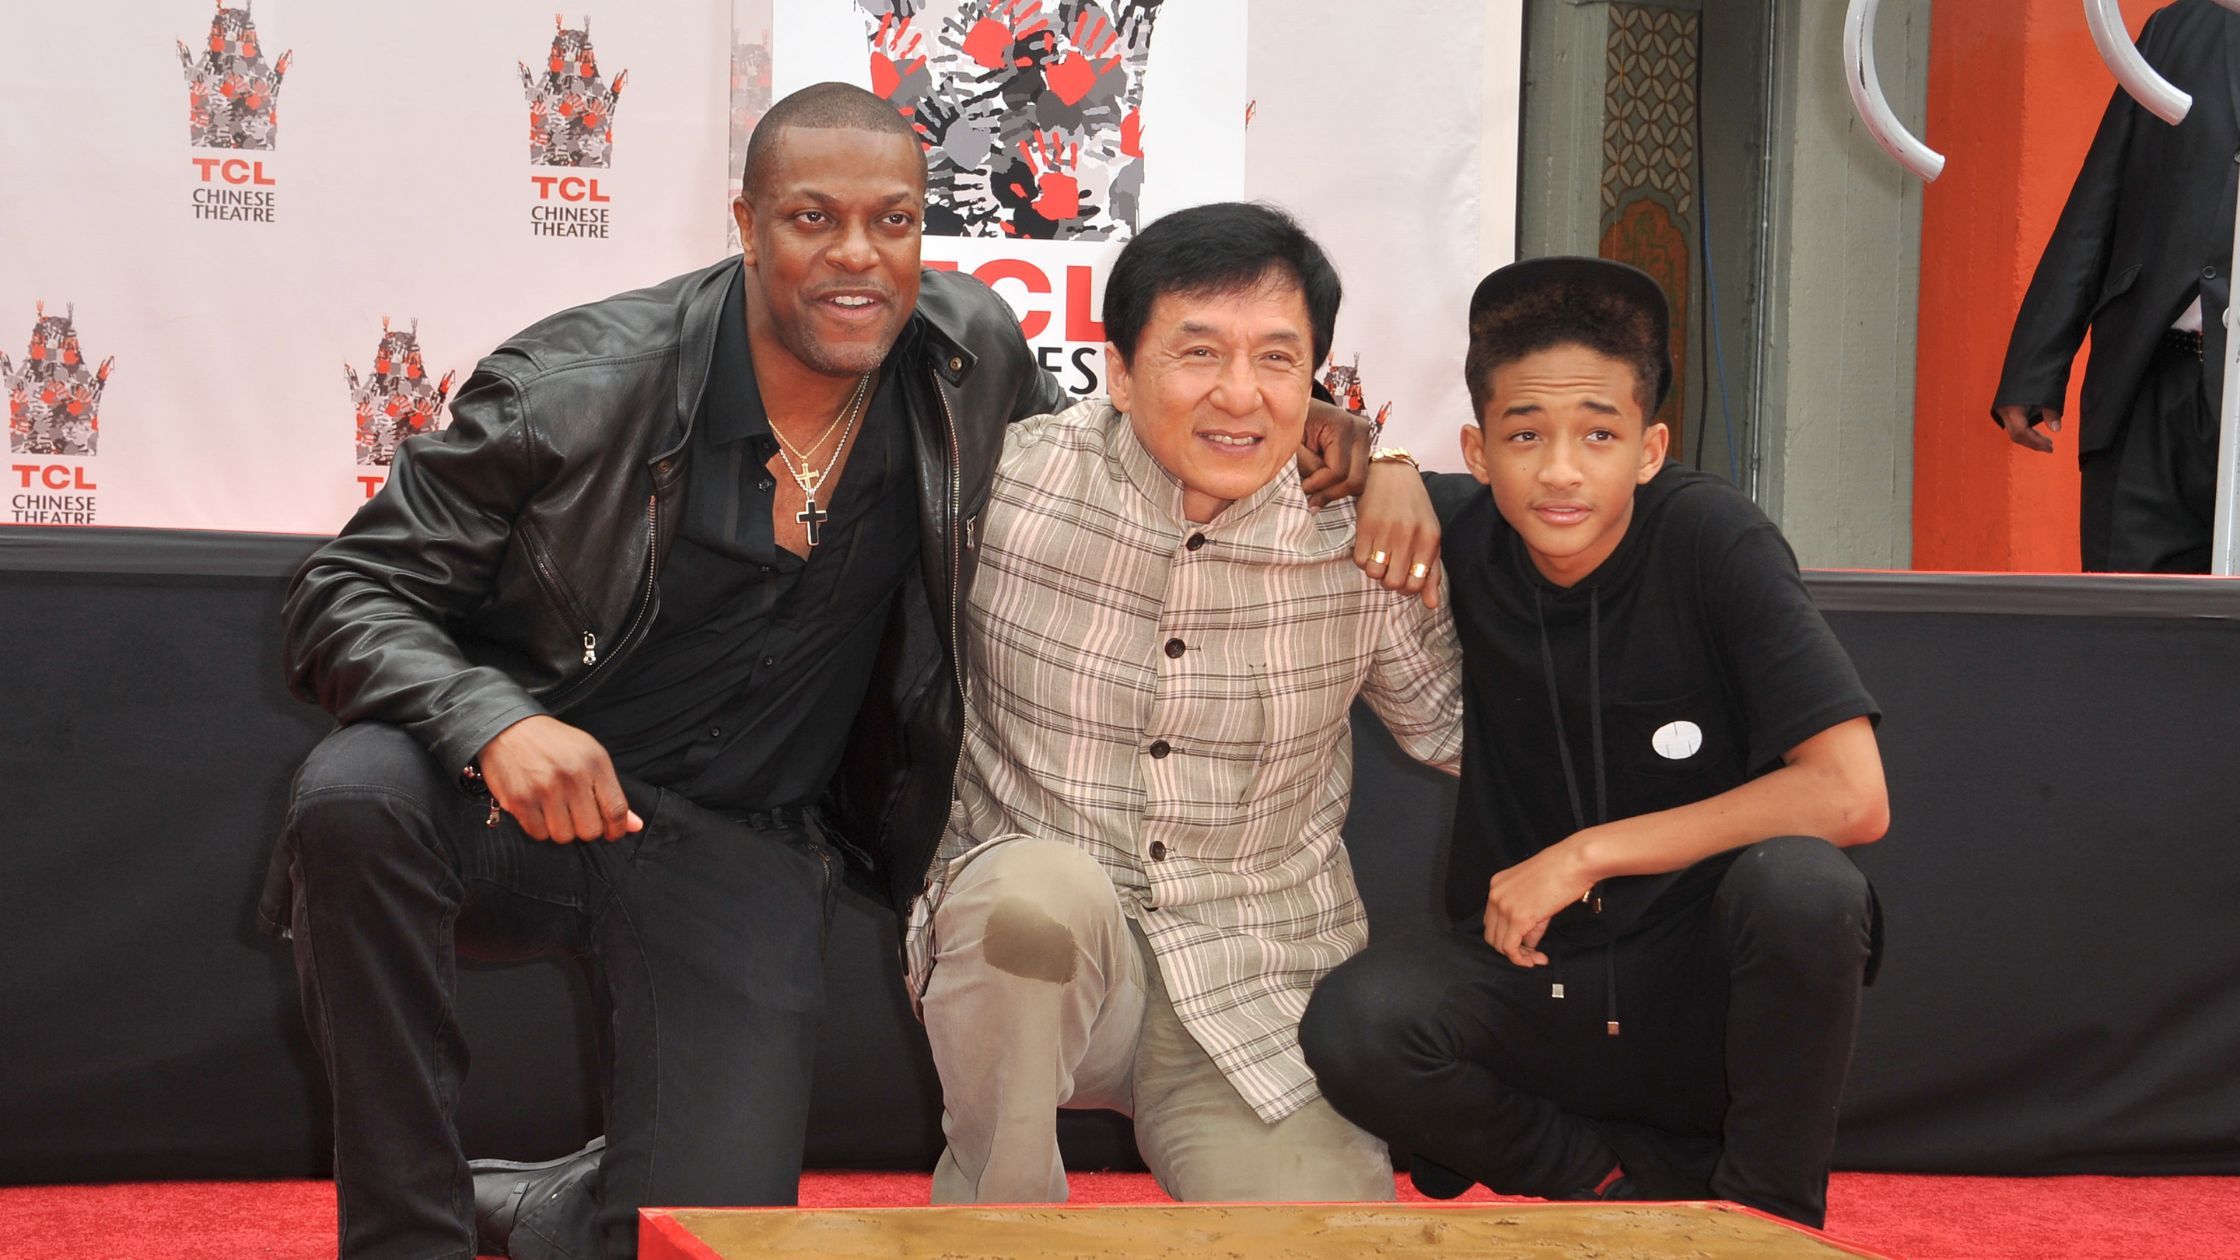 LOS ANGELES, CA - JUNE 6, 2013: Jackie Chan with Chris Tucker (left) & Jaden Smith at Chan's hand & footprint ceremony in the courtyard of the TCL Chinese Theatre, Hollywood. (Jaguar PS/Shutterstock.com)